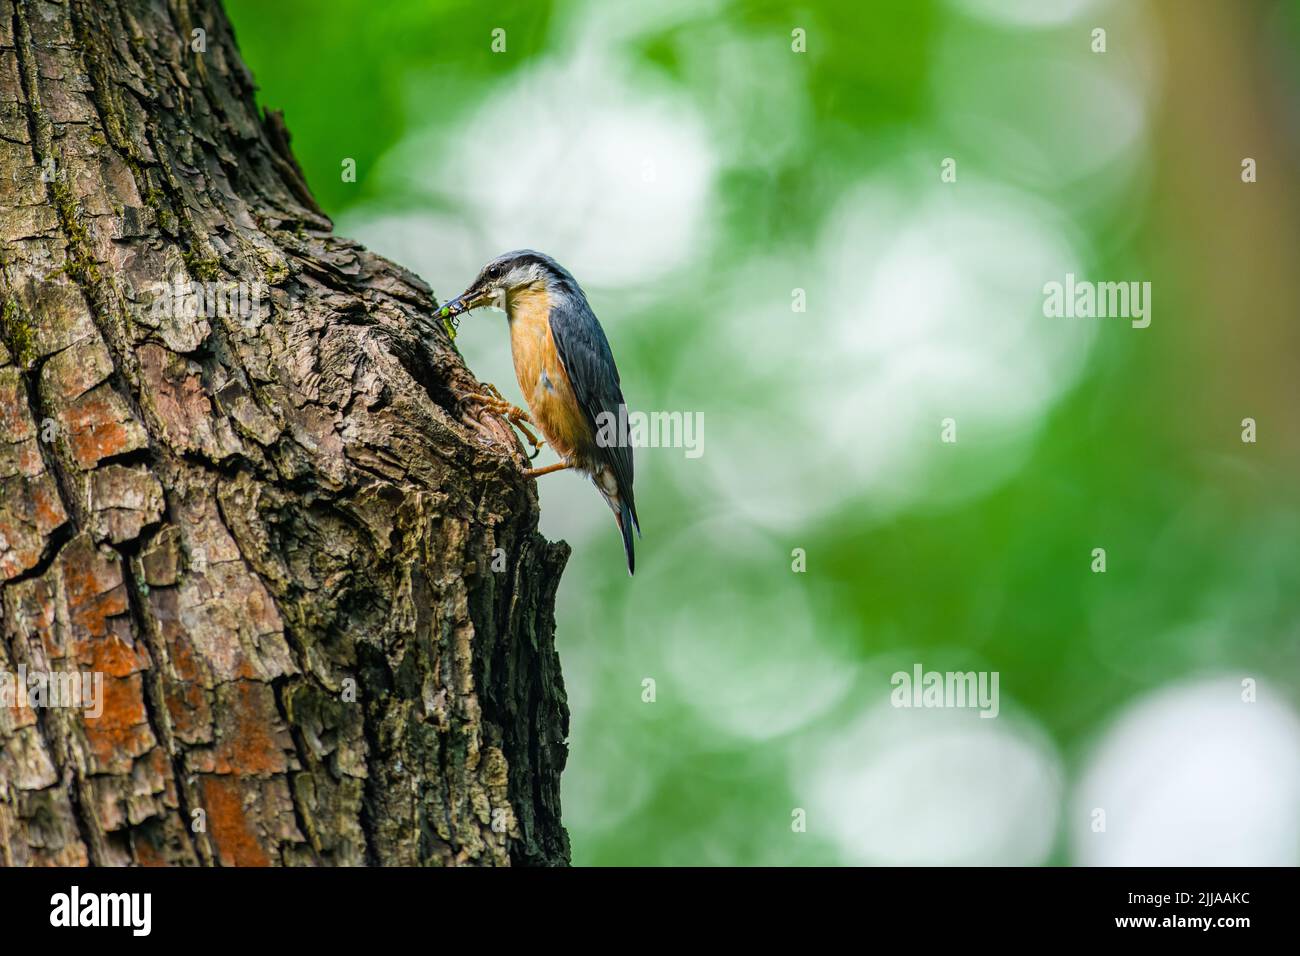 The Eurasian nuthatch or wood nuthatch (Sitta europaea) feeds its young, carrying insects in its beak, feeding. Stock Photo